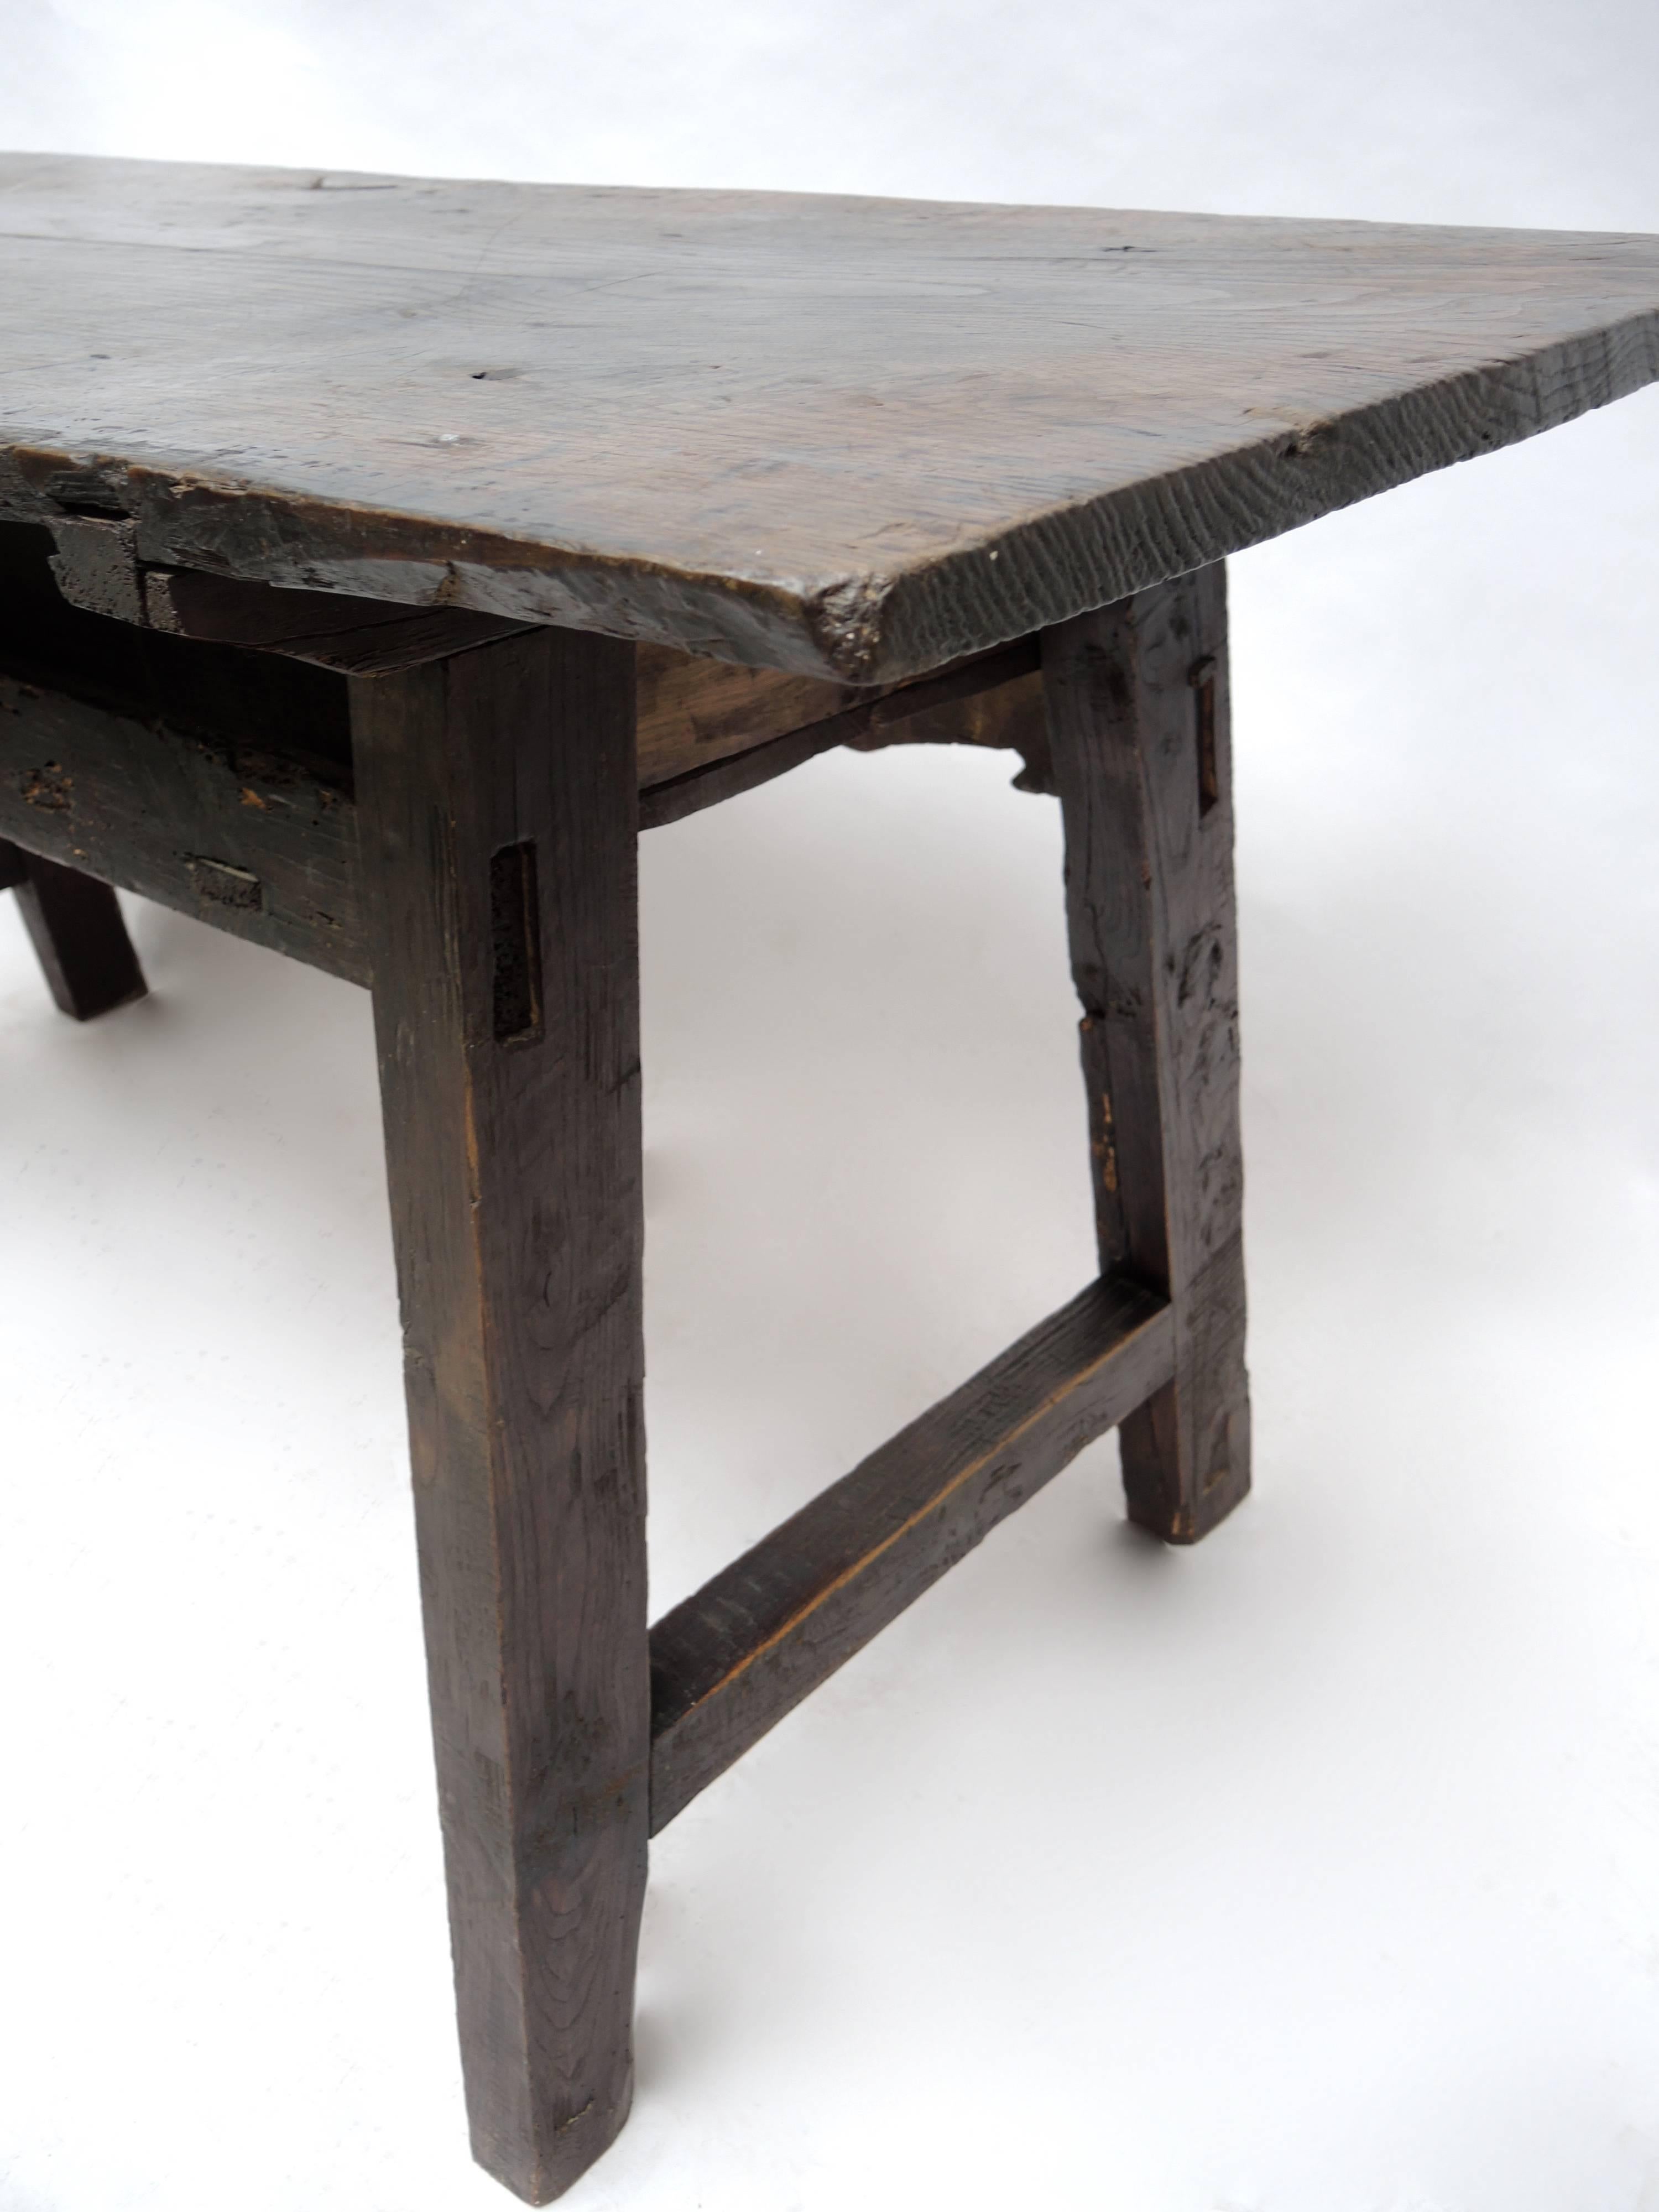 This beautiful Spanish Baroque table has an impressive and rare one board chestnut top. The table is made of solid chestnut and boast a very solid construction and smooth worn patina . The center drawer retains the original hand-wrought hardware,